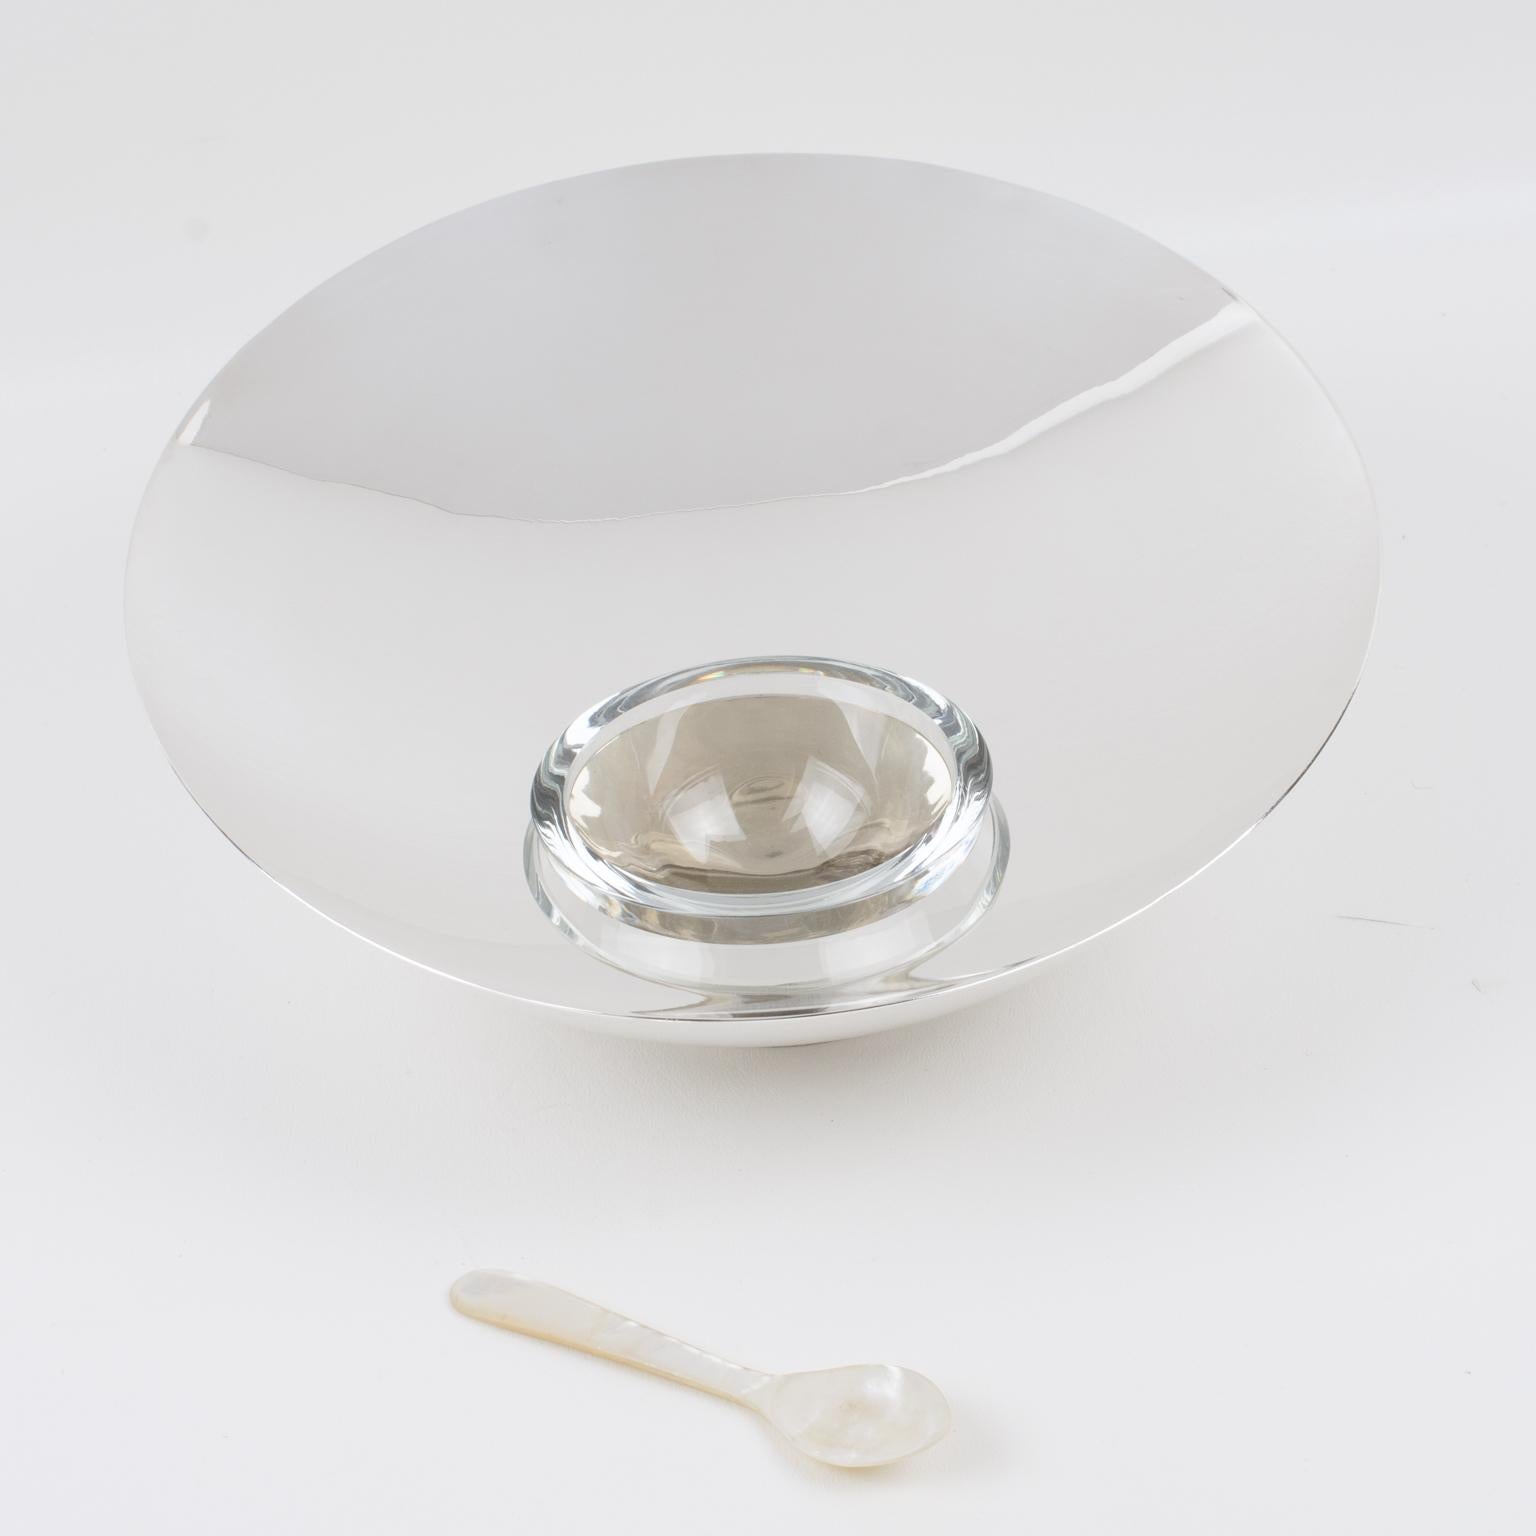 Late 20th Century Silver Plate and Crystal Caviar Bowl Dish by Nan Swid for SwidPowell